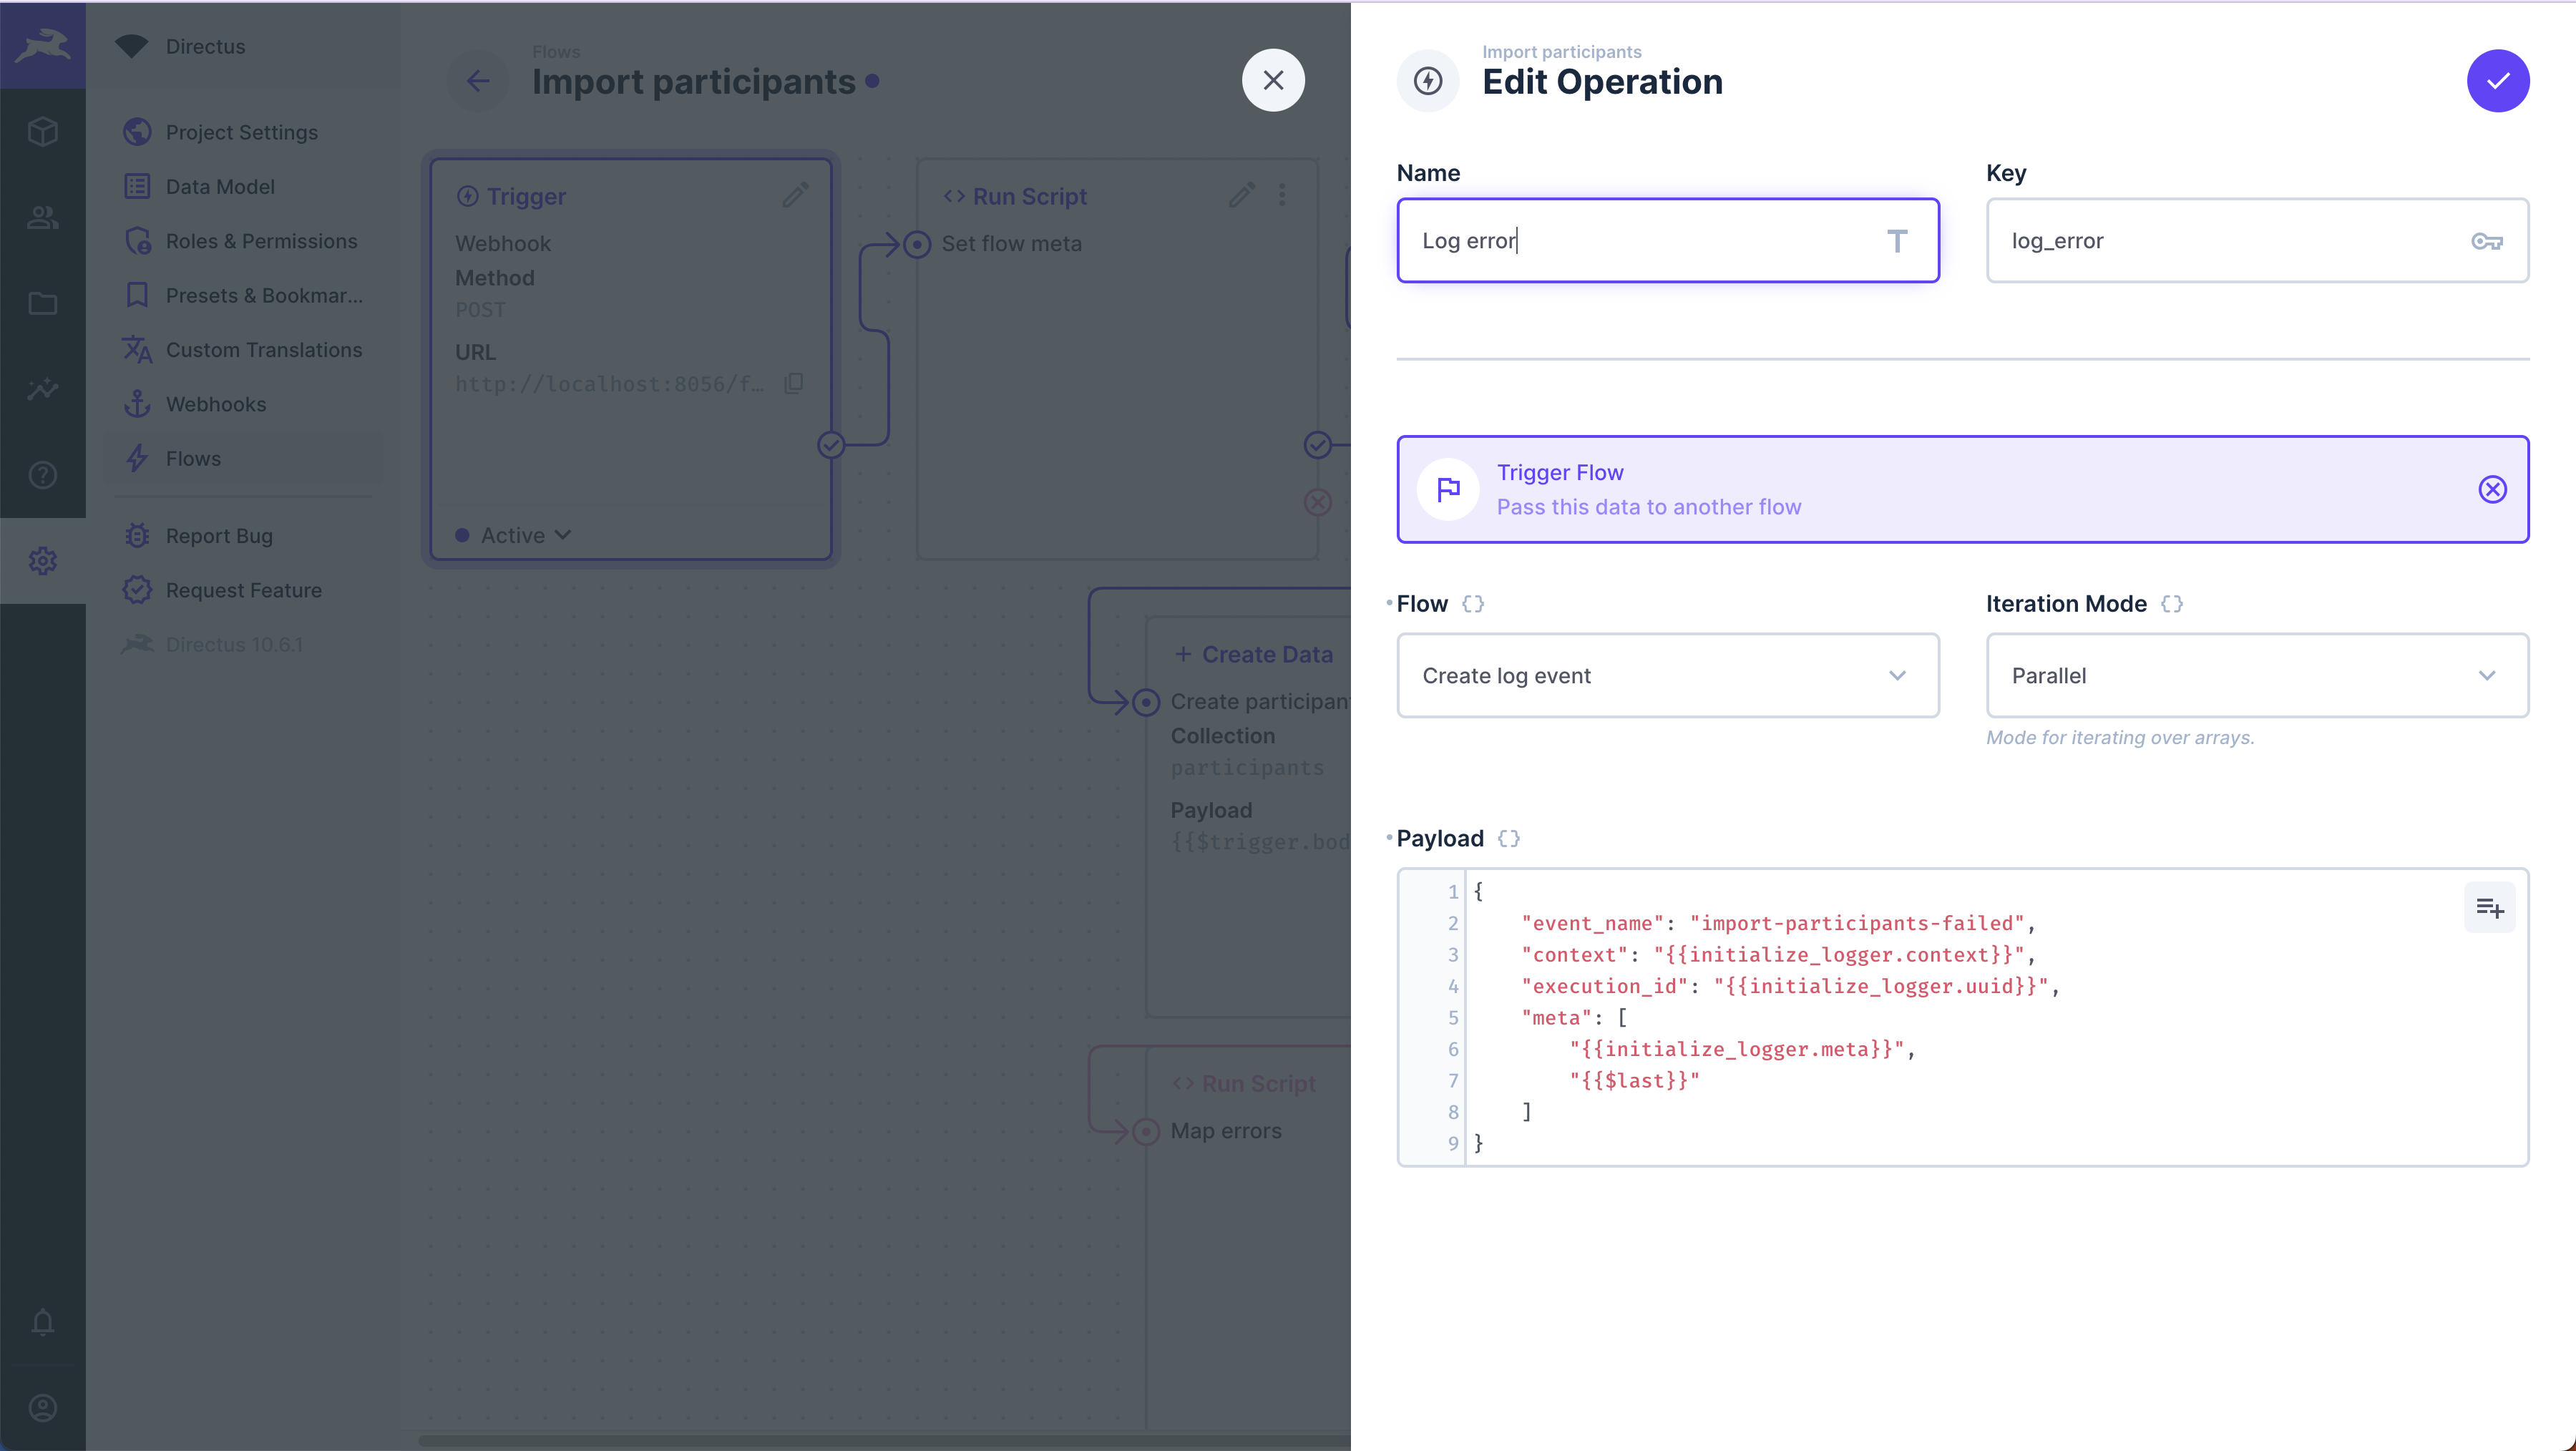 How to trigger a log event. Select trigger flow operation, use Create log event as flow, and pass event_name, context_id, execution_id, and meta as JS object